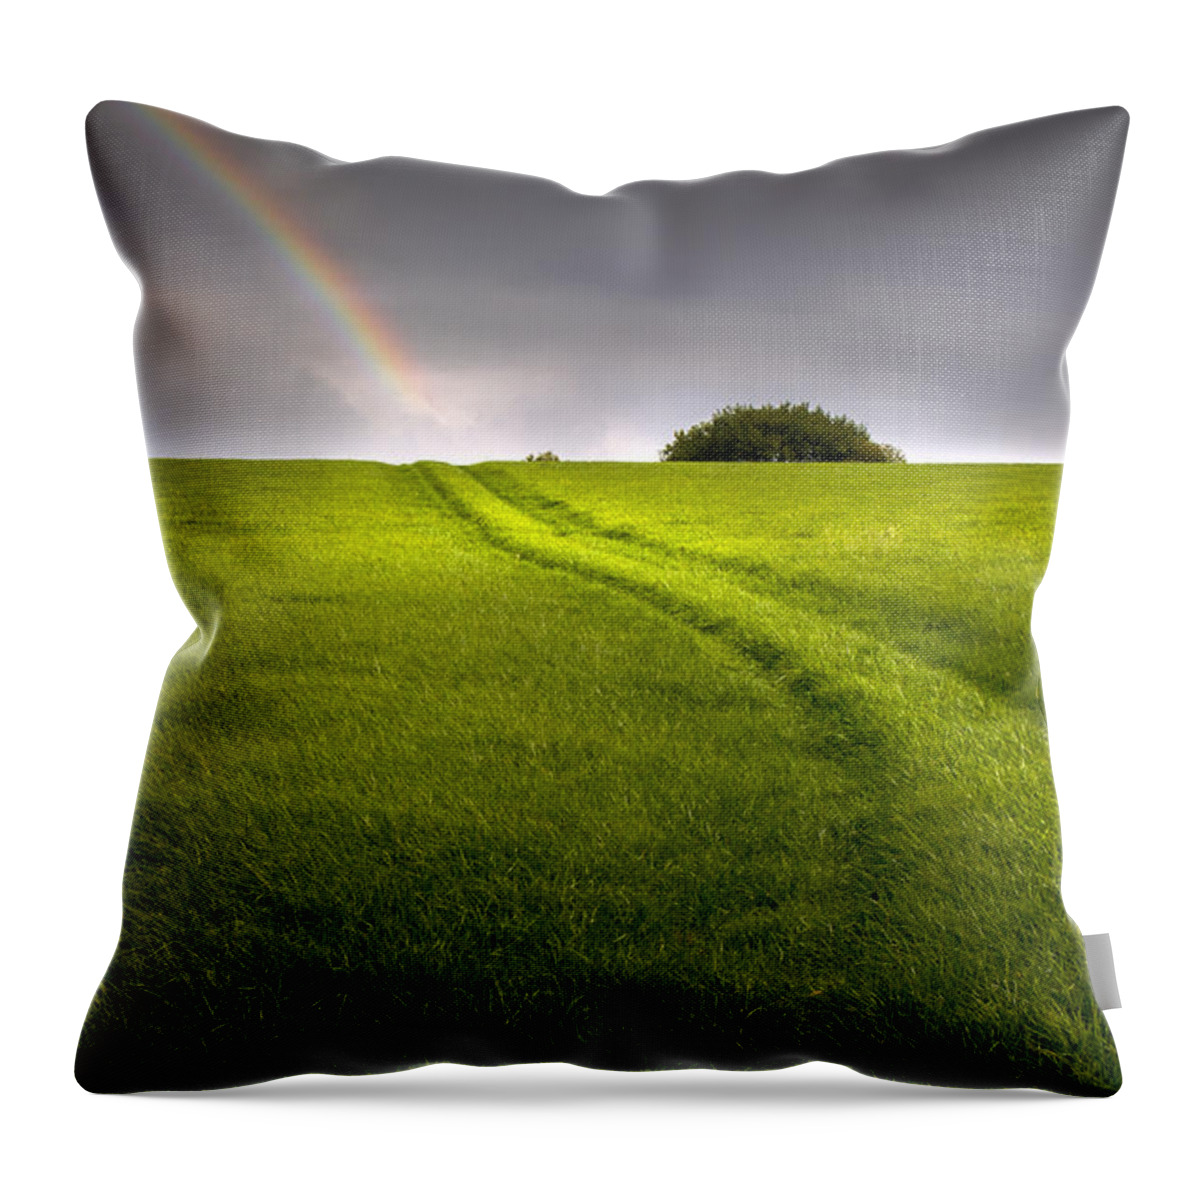 Rainbow Throw Pillow featuring the photograph The Right Way by Mal Bray